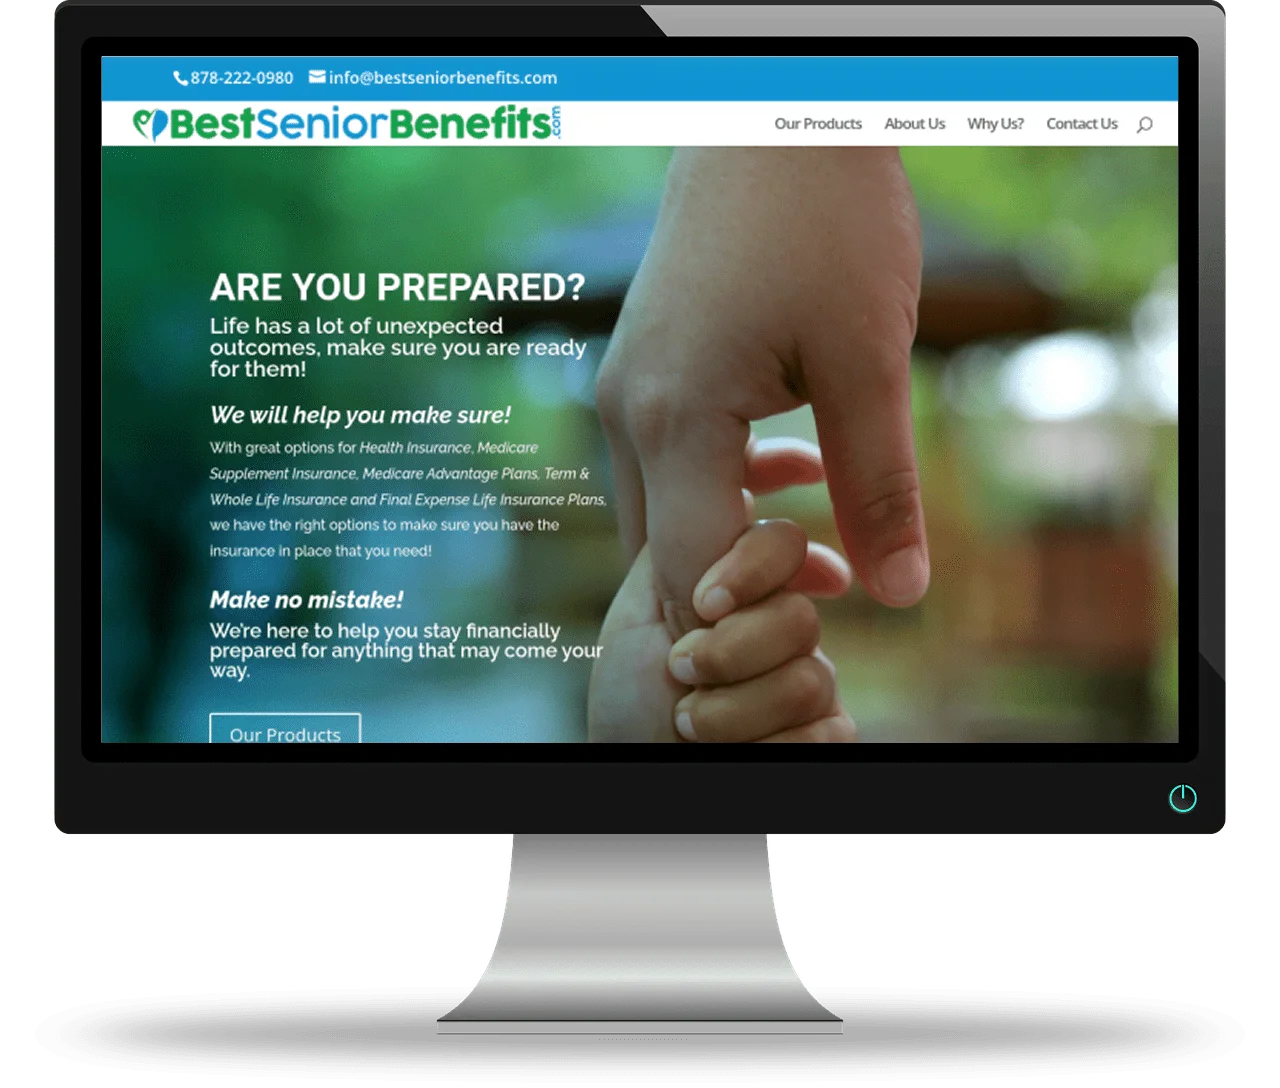 A website example - Our client BestSeniorBenefits.com